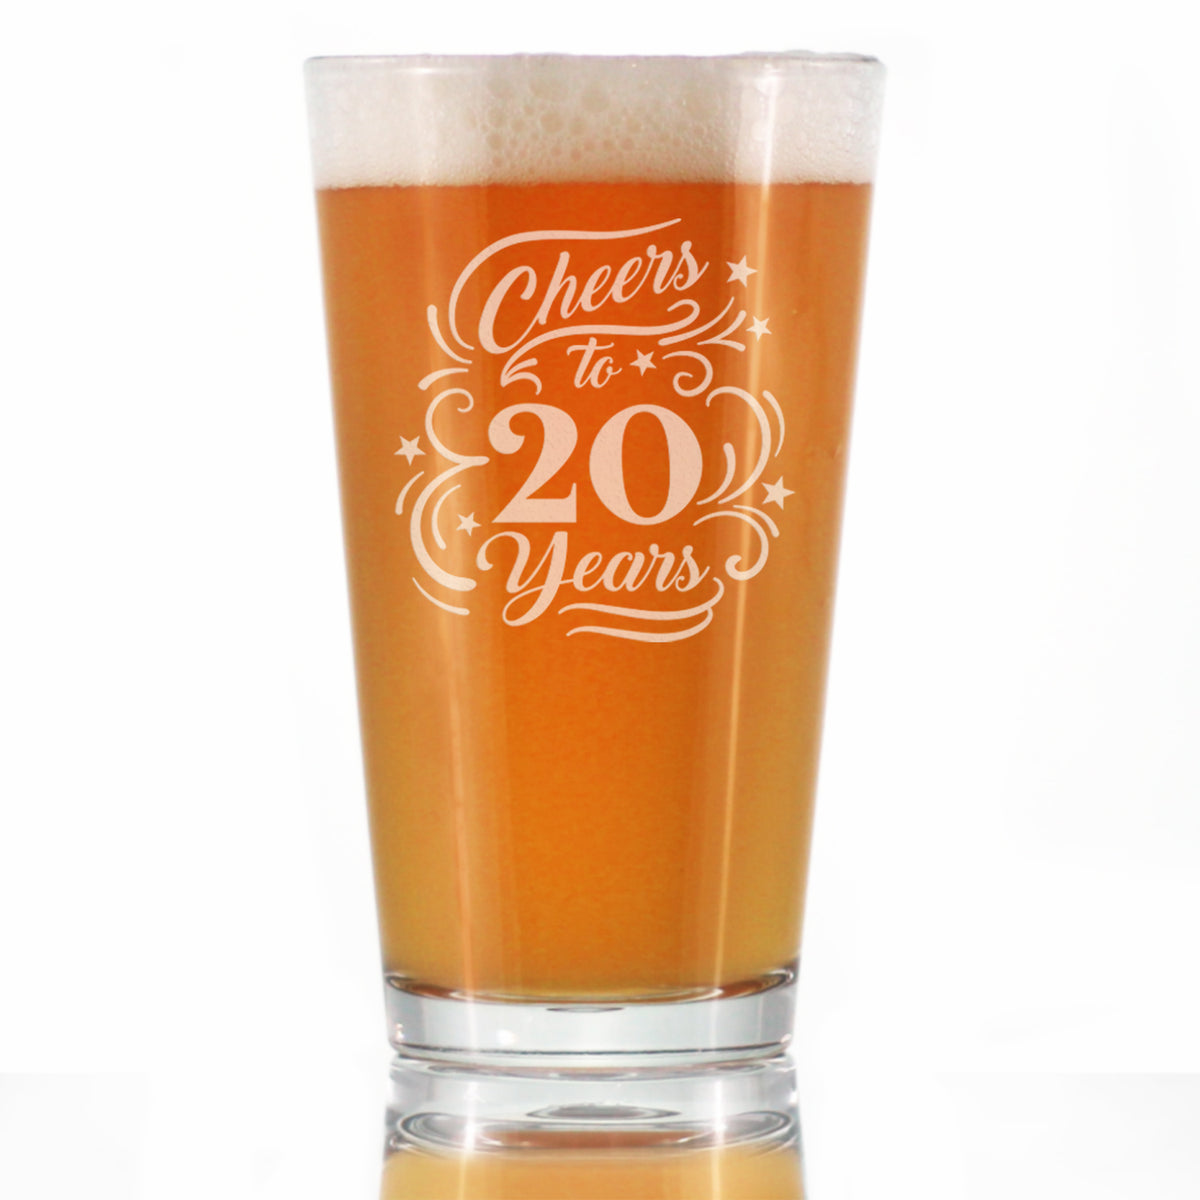 Cheers to 20 Years - Pint Glass for Beer - Gifts for Women &amp; Men - 20th Anniversary Party Decor - 16 Oz Glasses